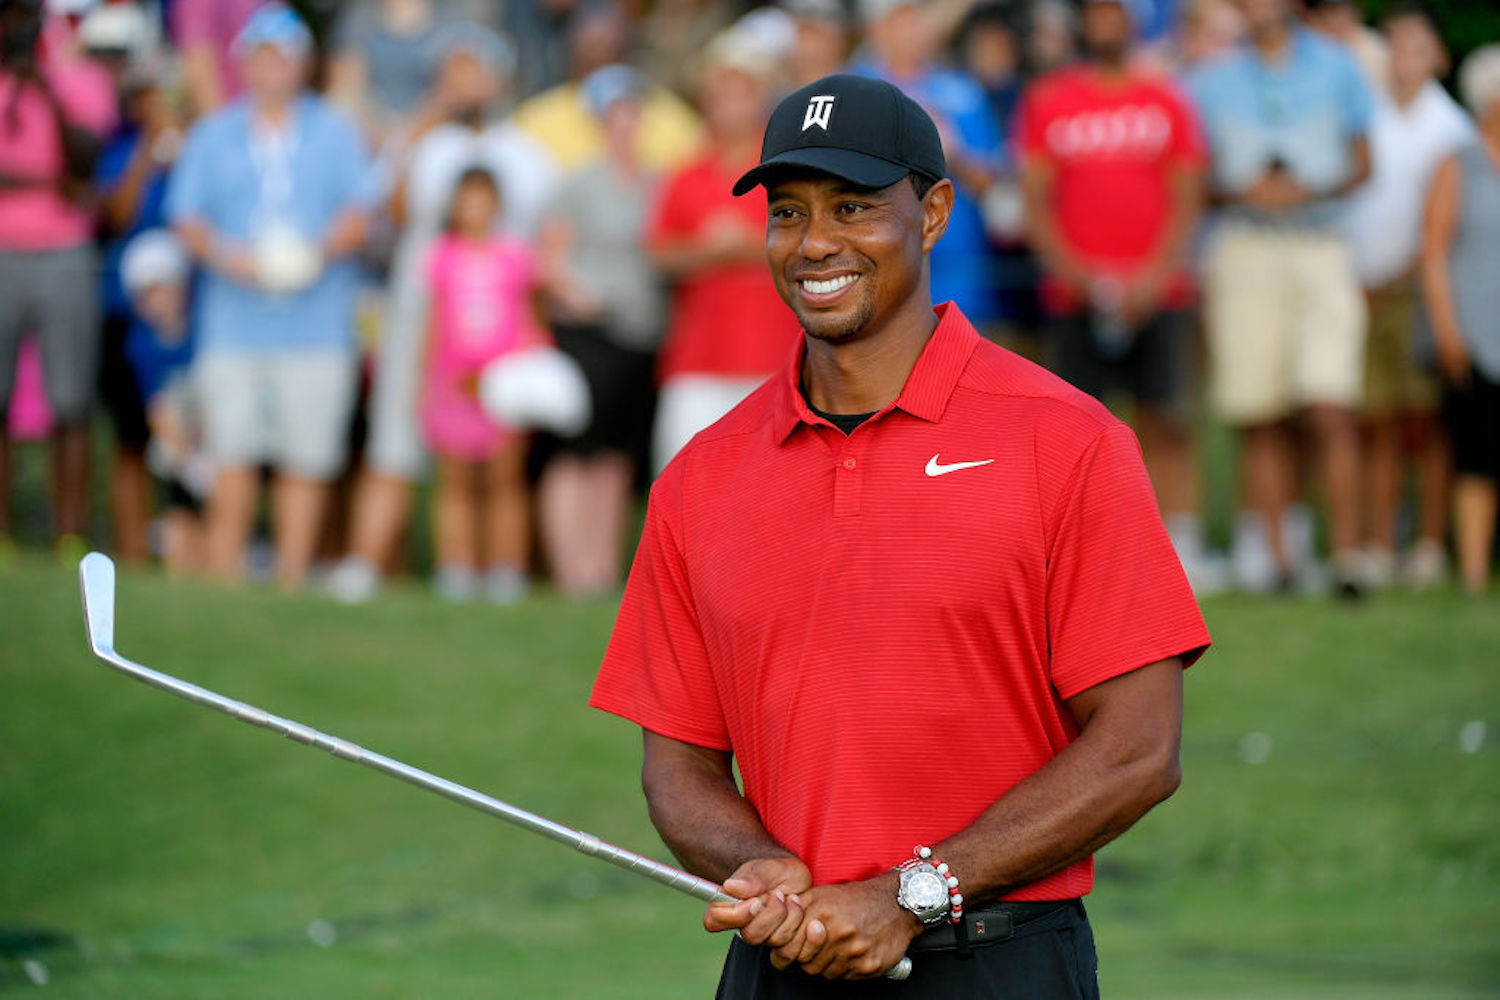 What Is Tiger Woods' Real Name?